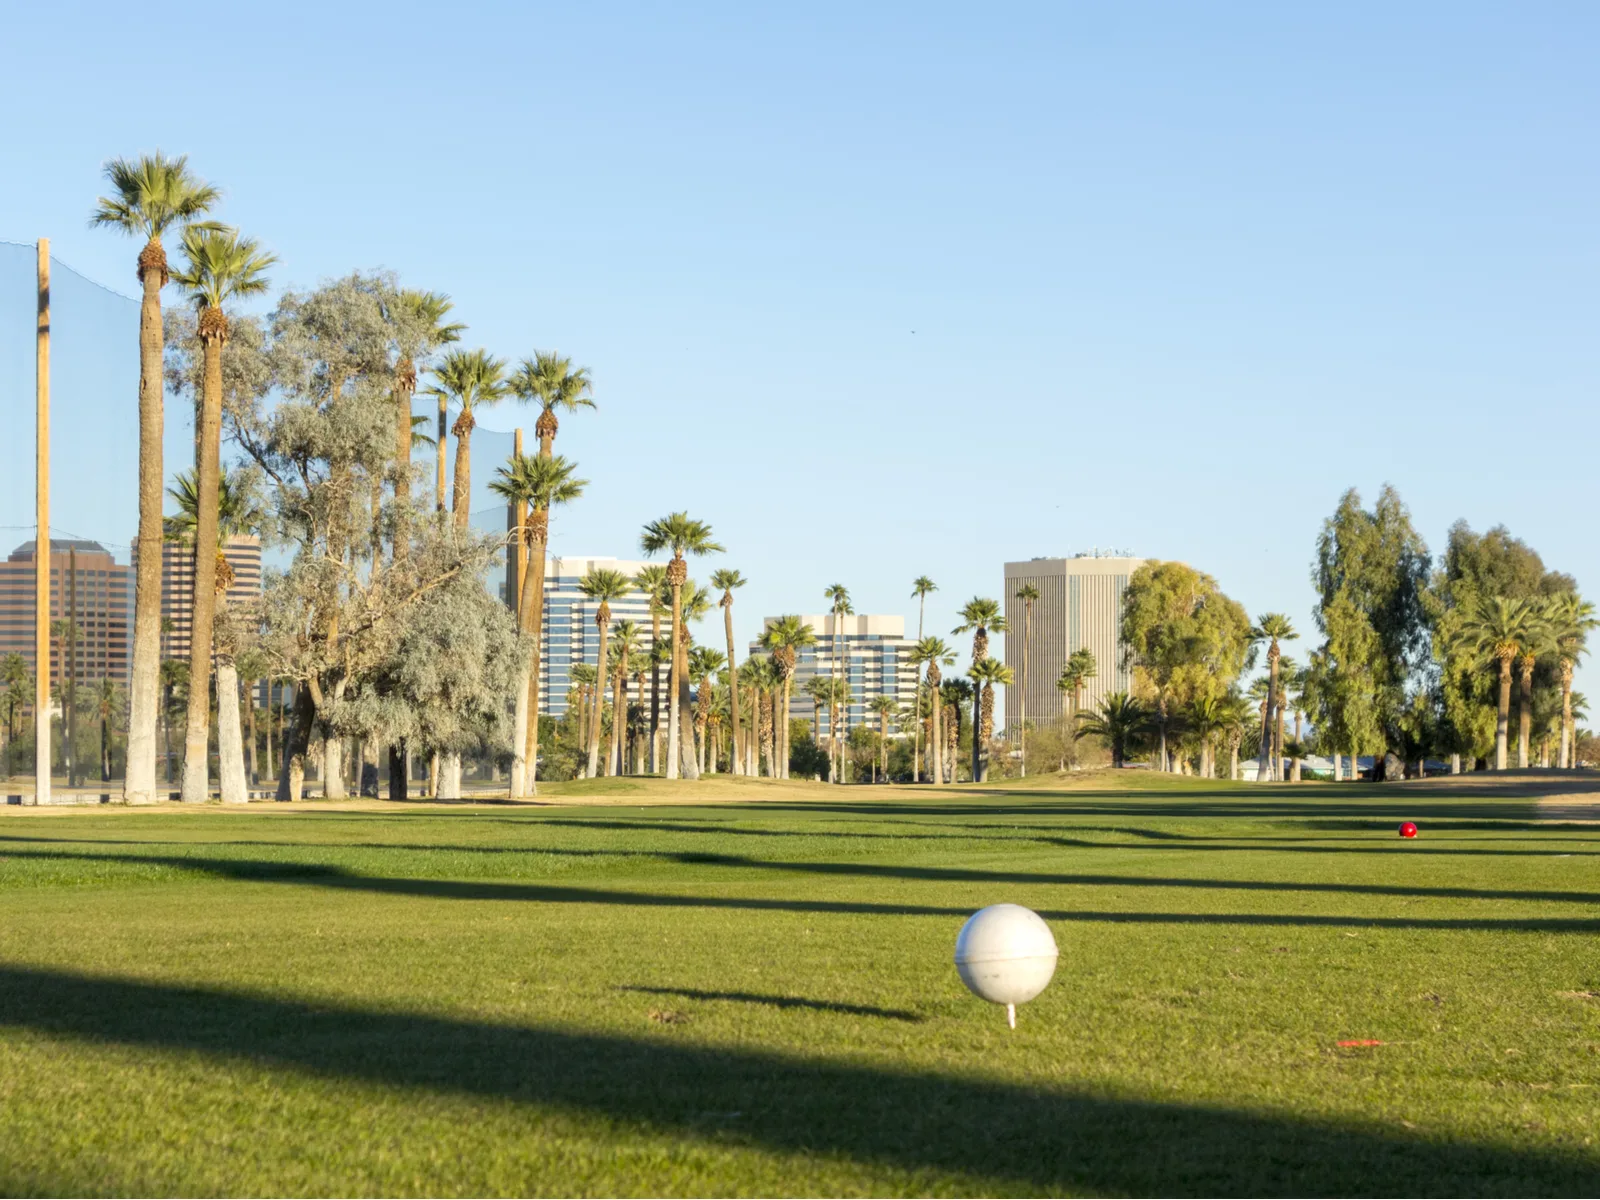 Golf course in arizona, one of the best things to do in Phoenix, pictured on the fairway